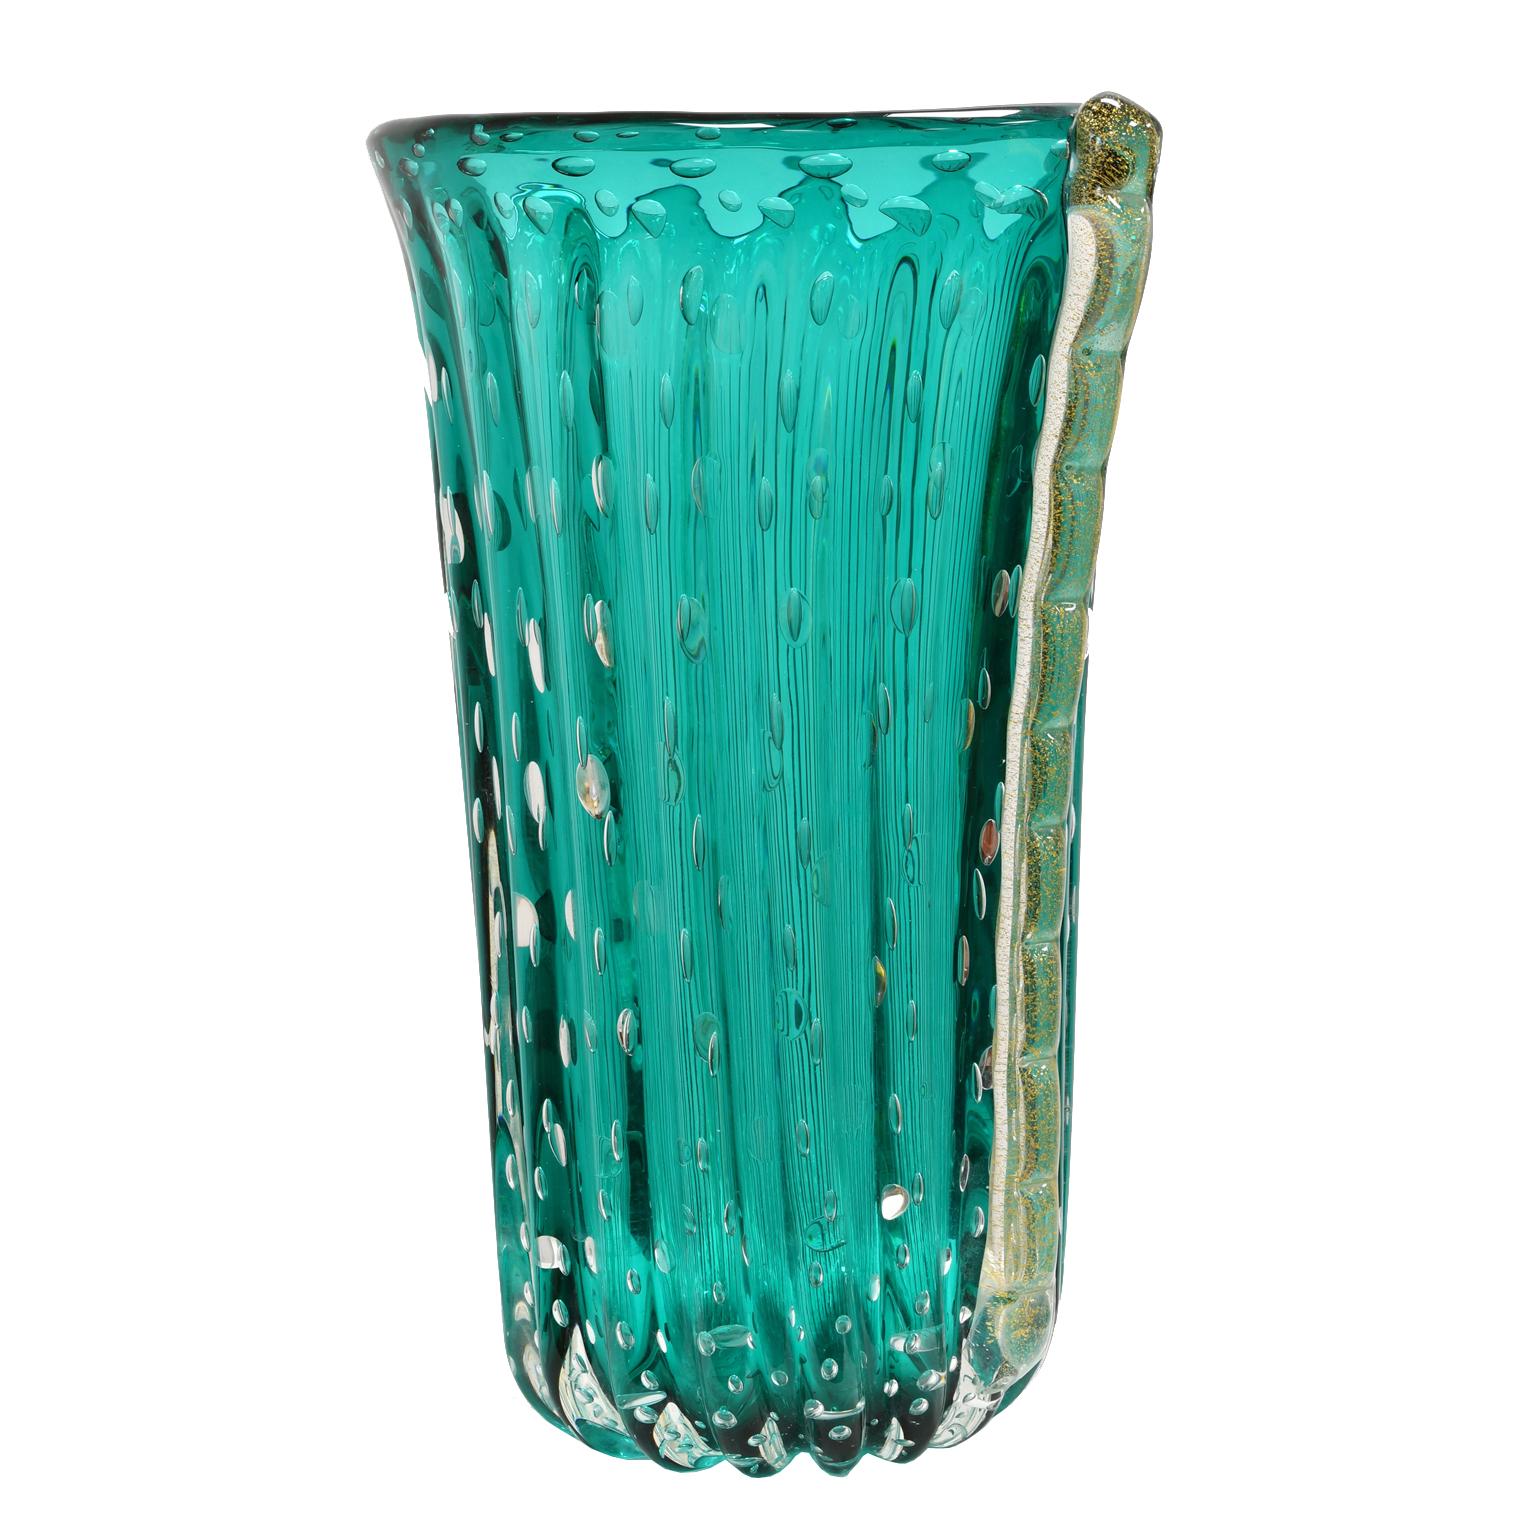 Italian decorative Art Glass vase from the workshop of Murano glass artist Archimede Seguso. Vase is signed 